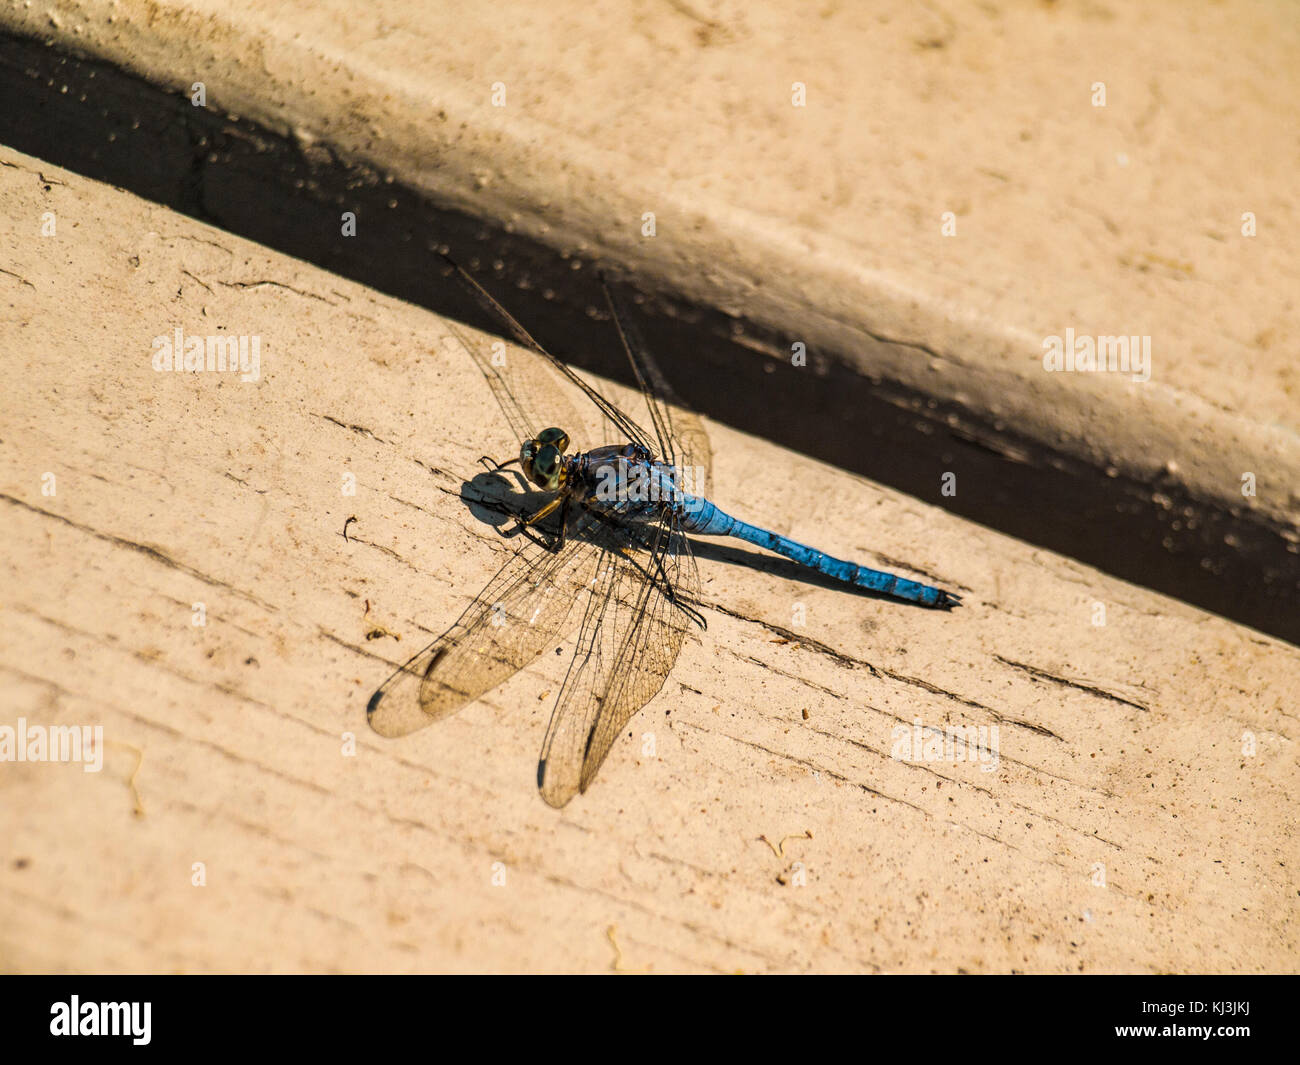 Dragonfly resting on wood tile Stock Photo